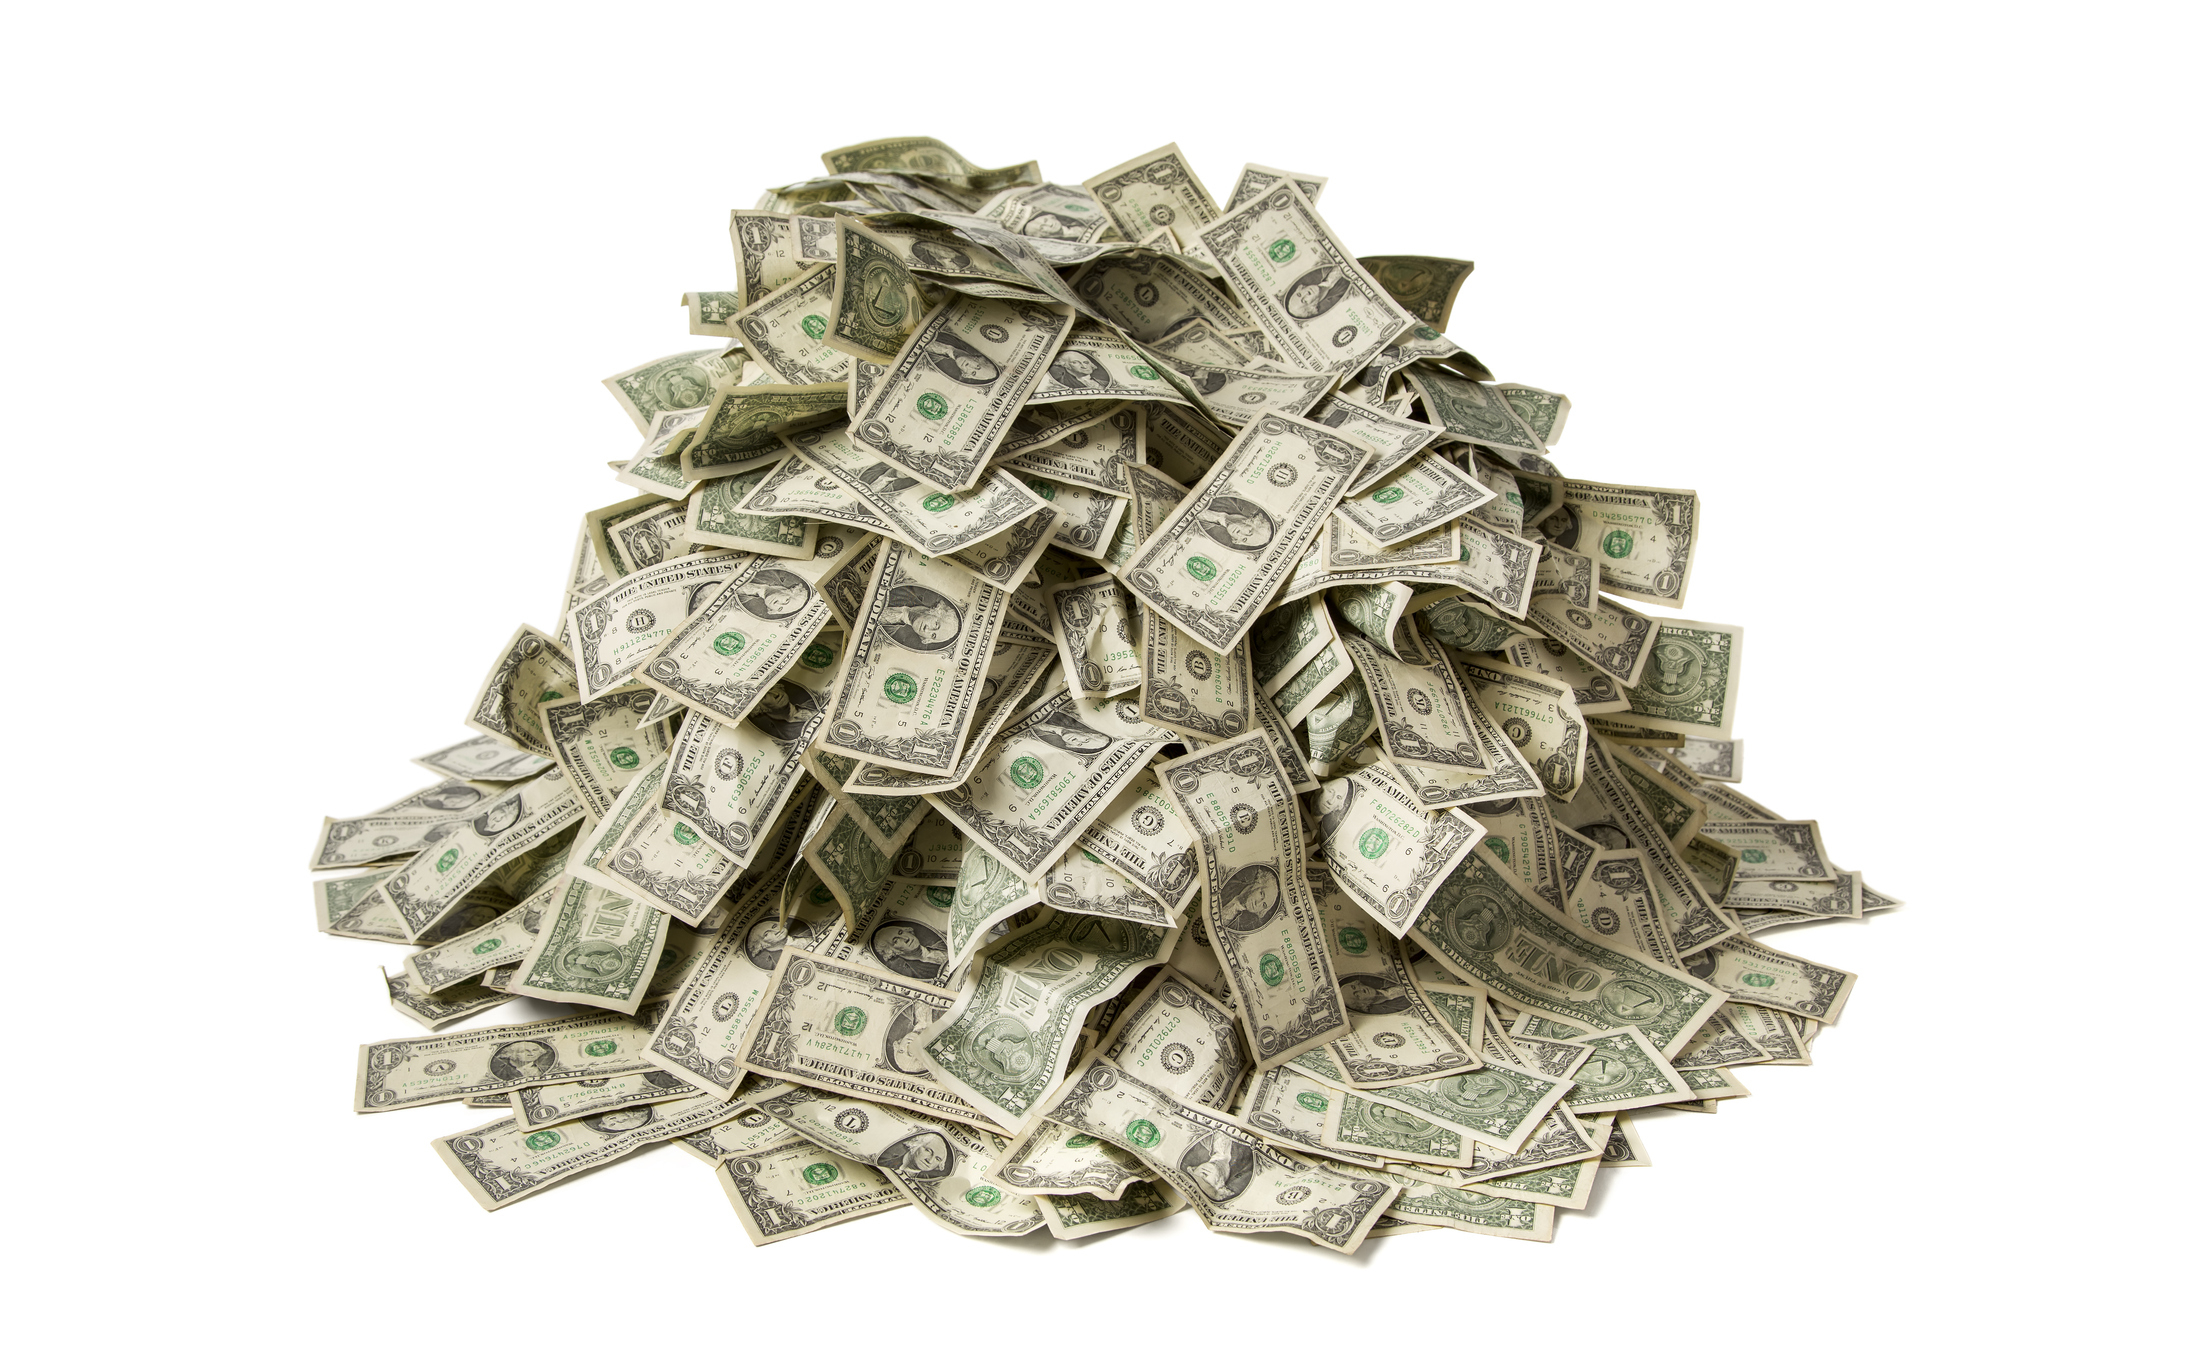 Pile of US one-dollar bills scattered on a plain background